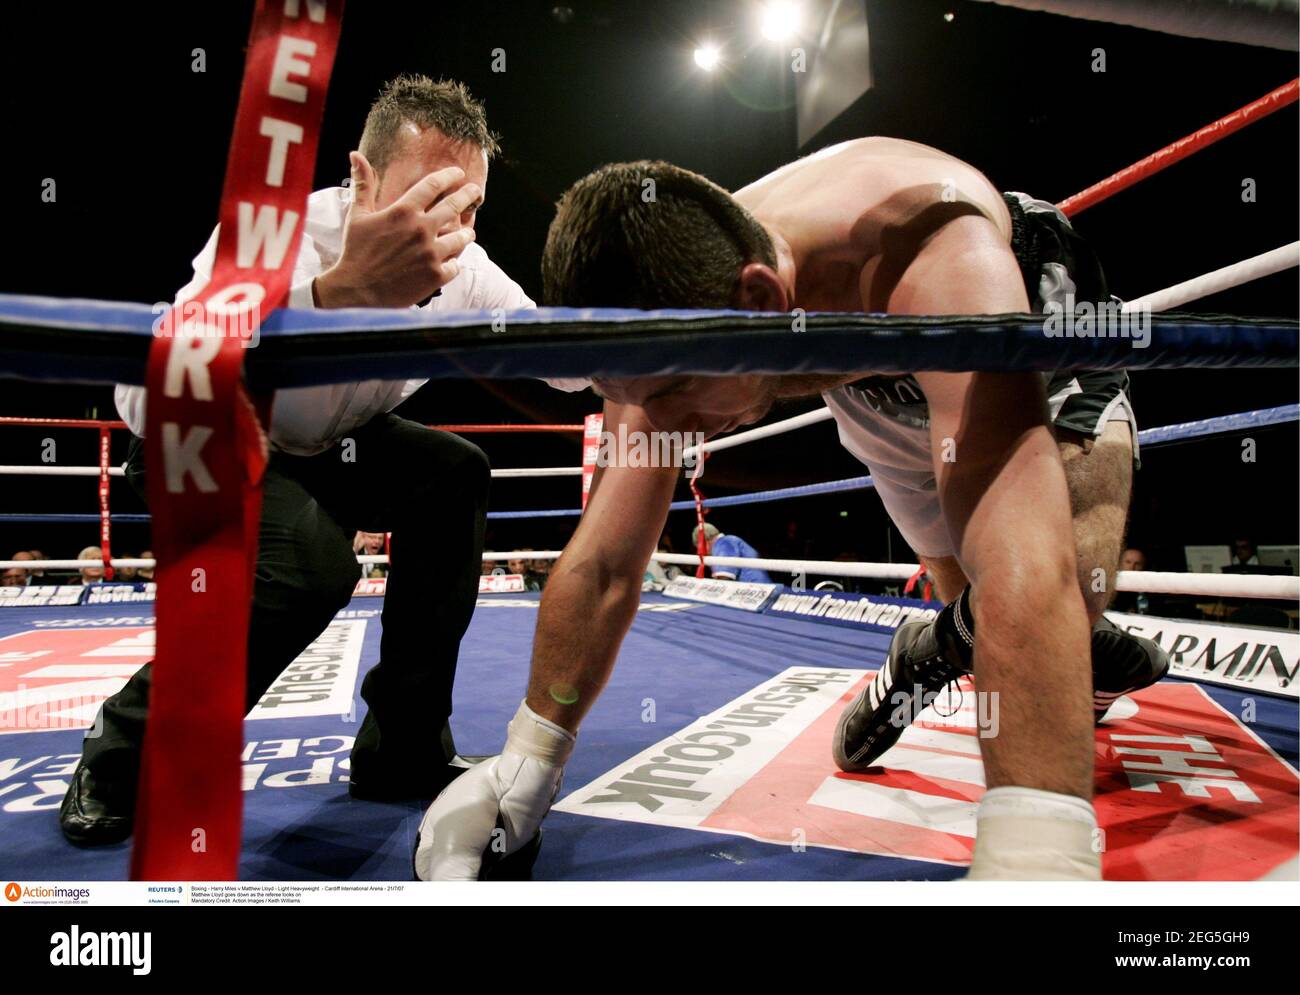 Boxing - Harry Miles v Matthew Lloyd - Light Heavyweight - Cardiff  International Arena - 21/7/07 Matthew Lloyd goes down as the referee looks  on Mandatory Credit: Action Images / Keith Williams Stock Photo - Alamy